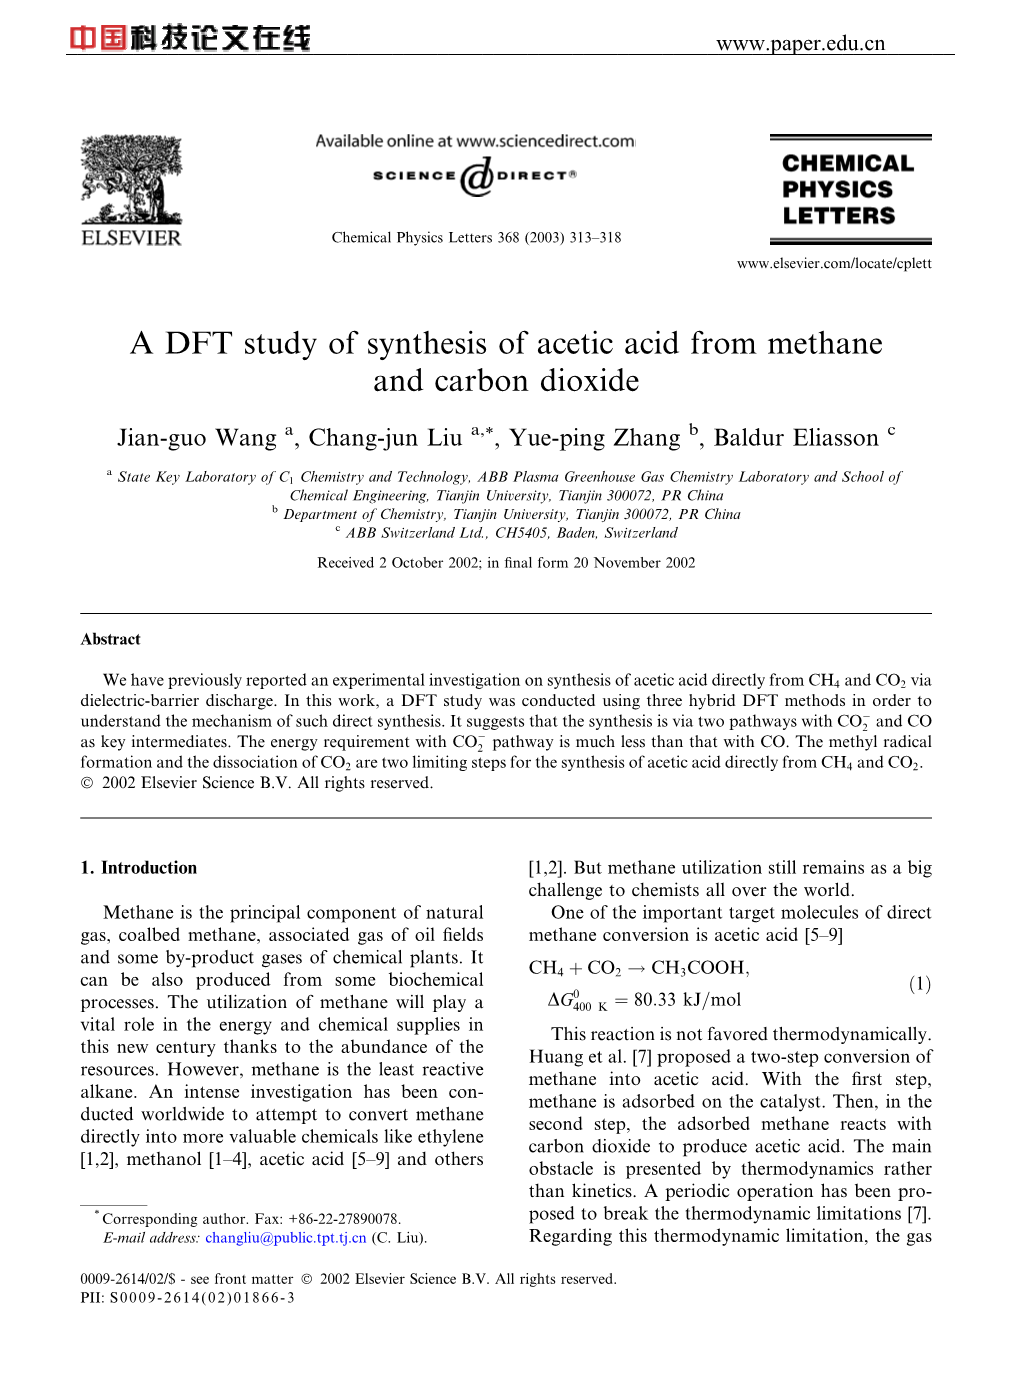 A DFT Study of Synthesis of Acetic Acid from Methane and Carbon Dioxide